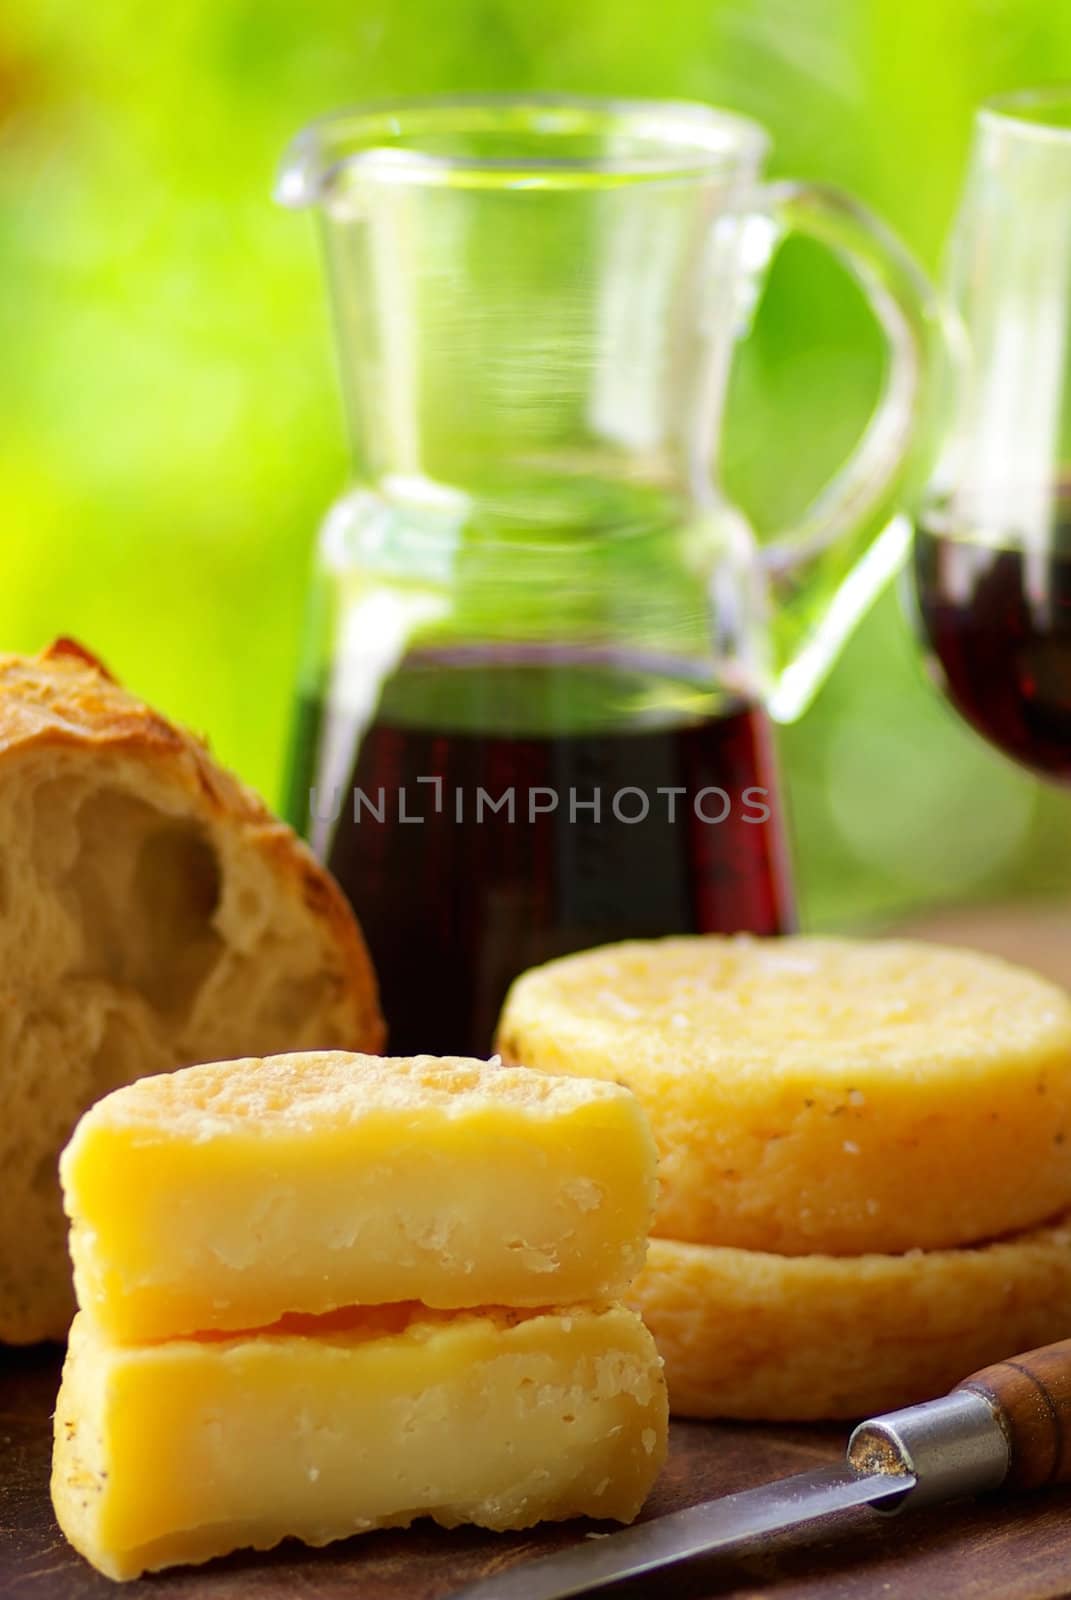 Wine, bread and cheese.